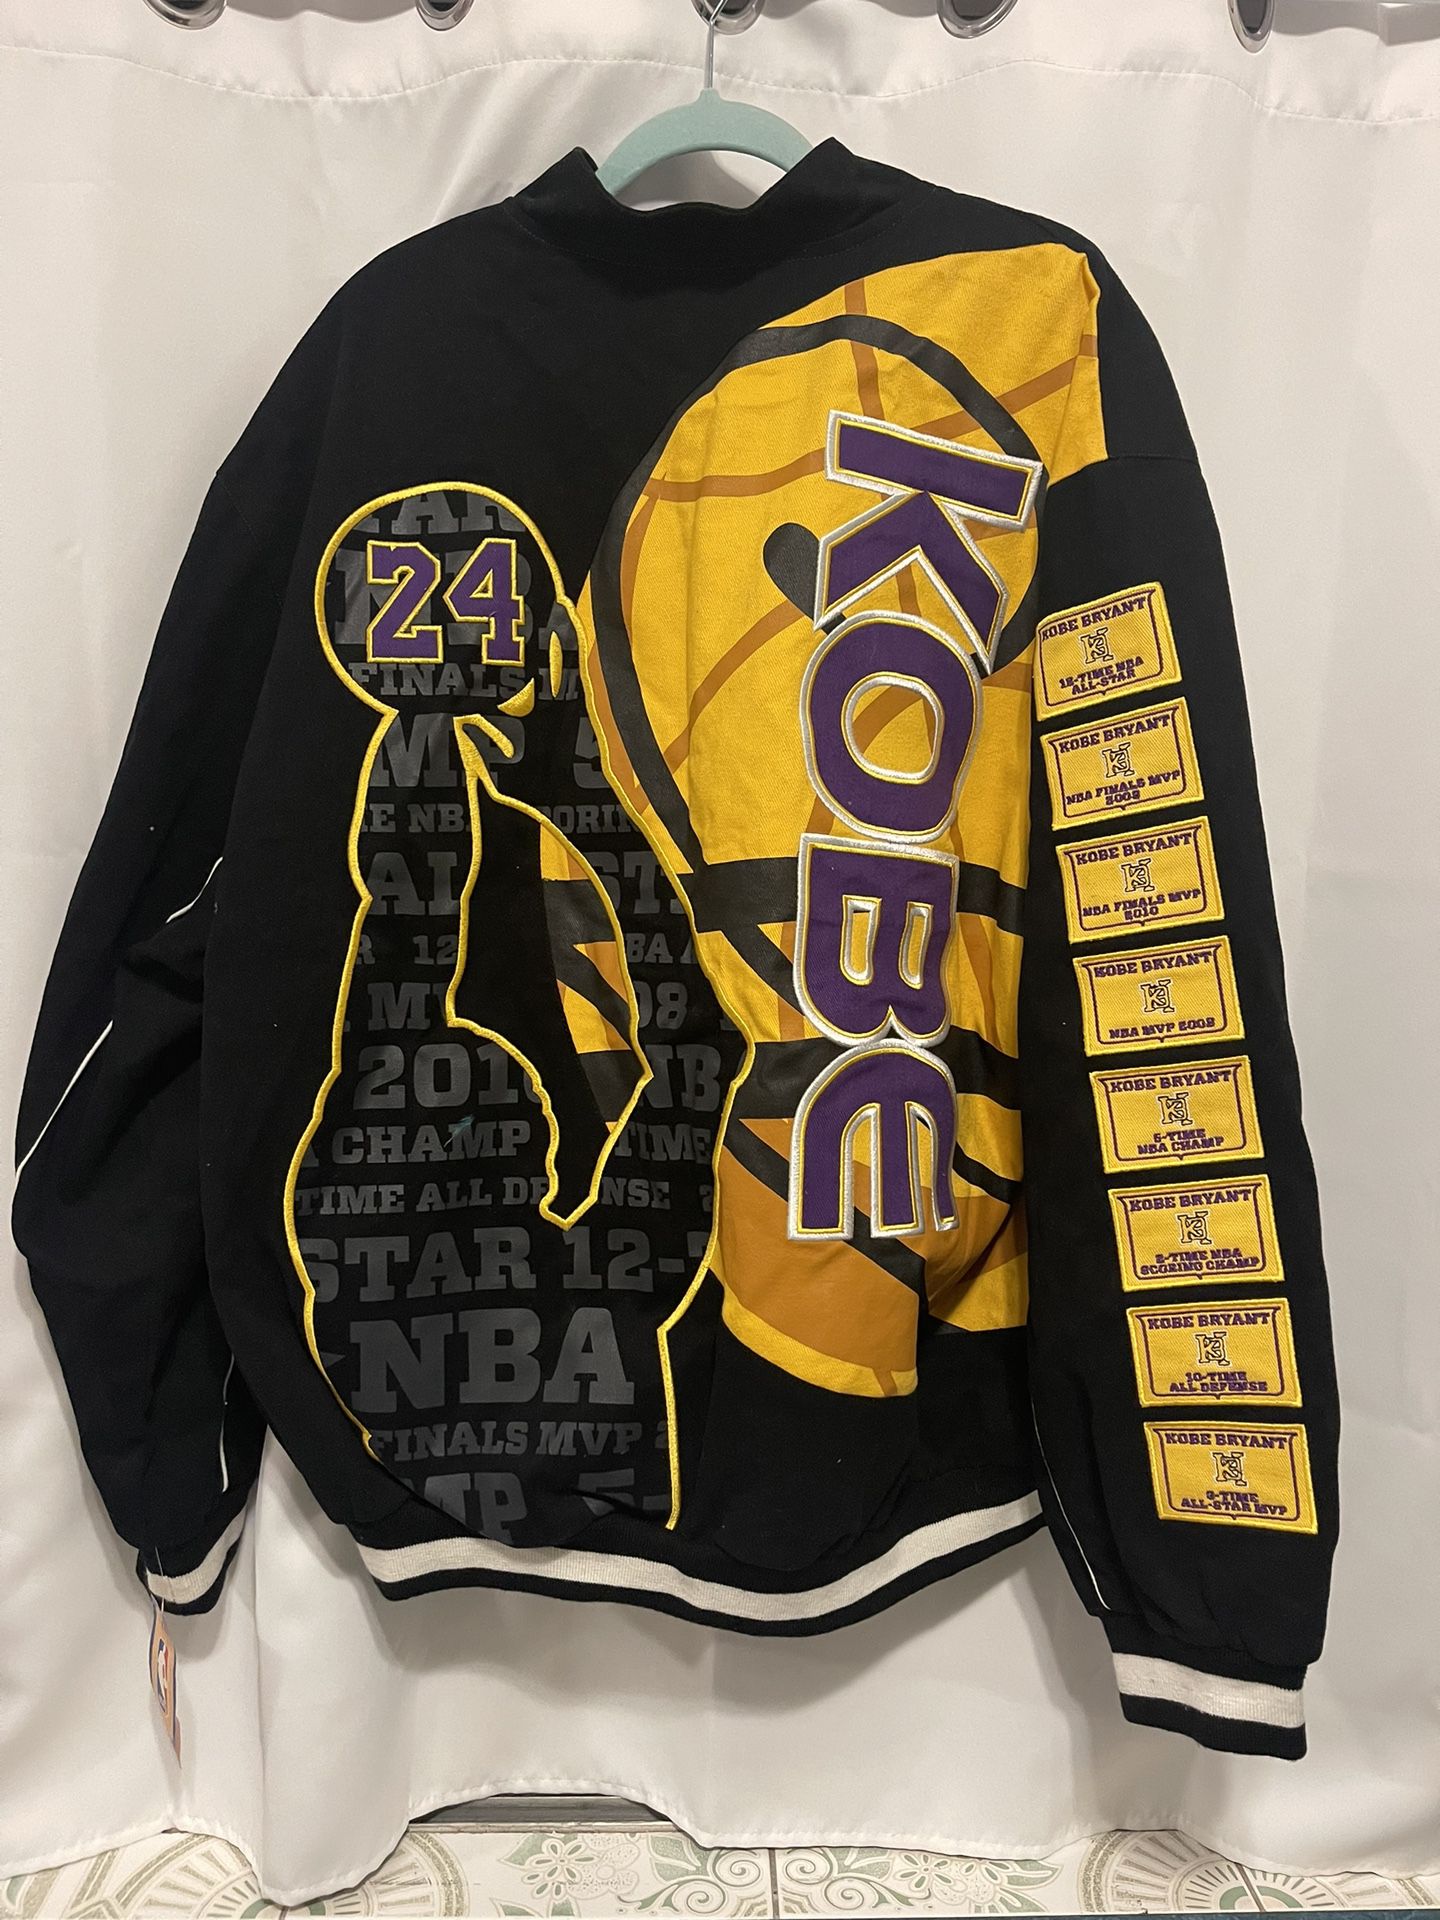 NIKE LA Los Angeles LAKERS White Warm Up Shooting Jacket Kobe BryantXL for  Sale in Trabuco Canyon, CA - OfferUp